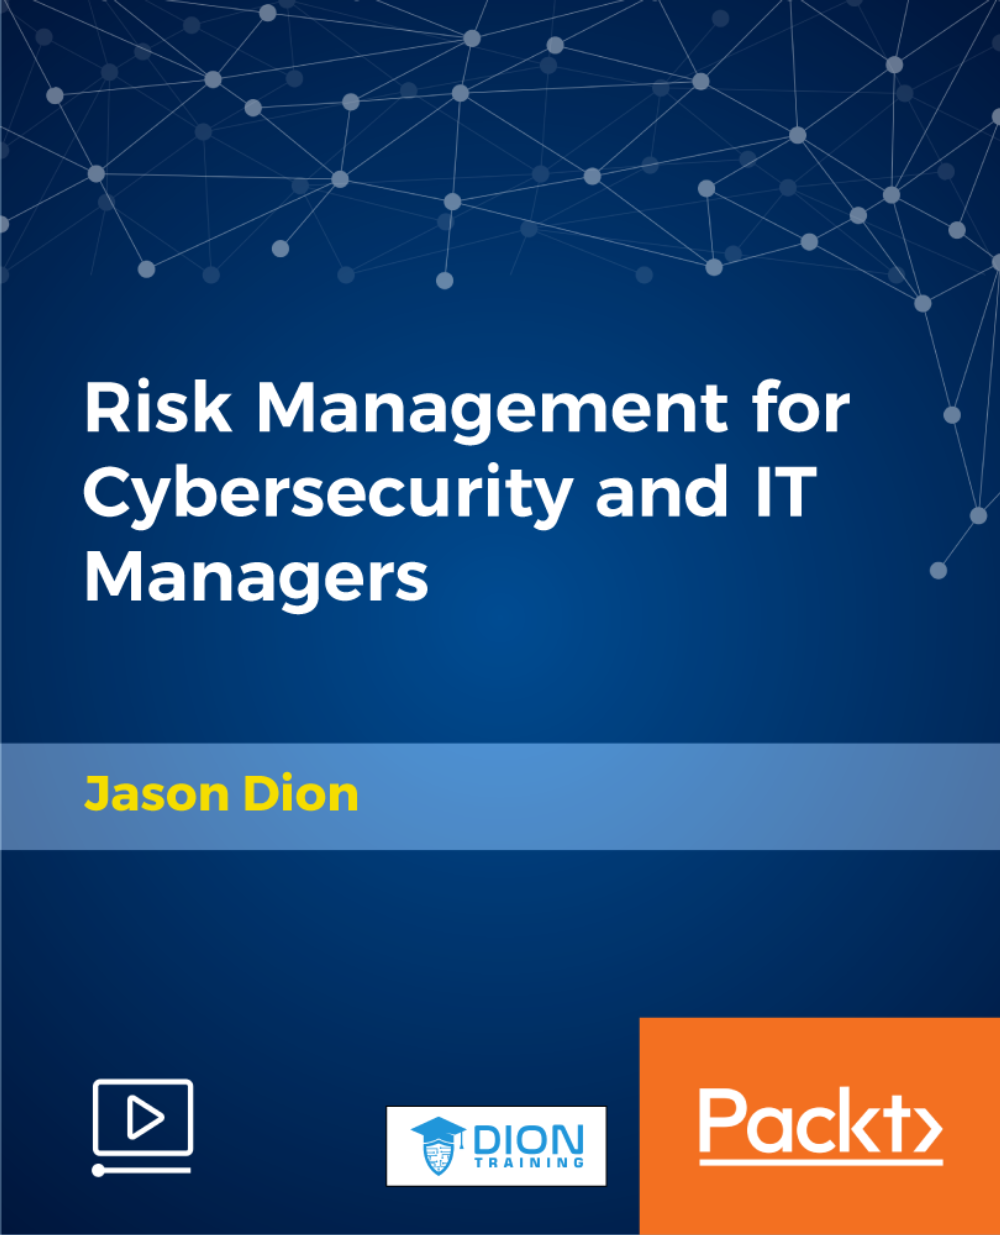 Risk Management for Cybersecurity and IT Managers